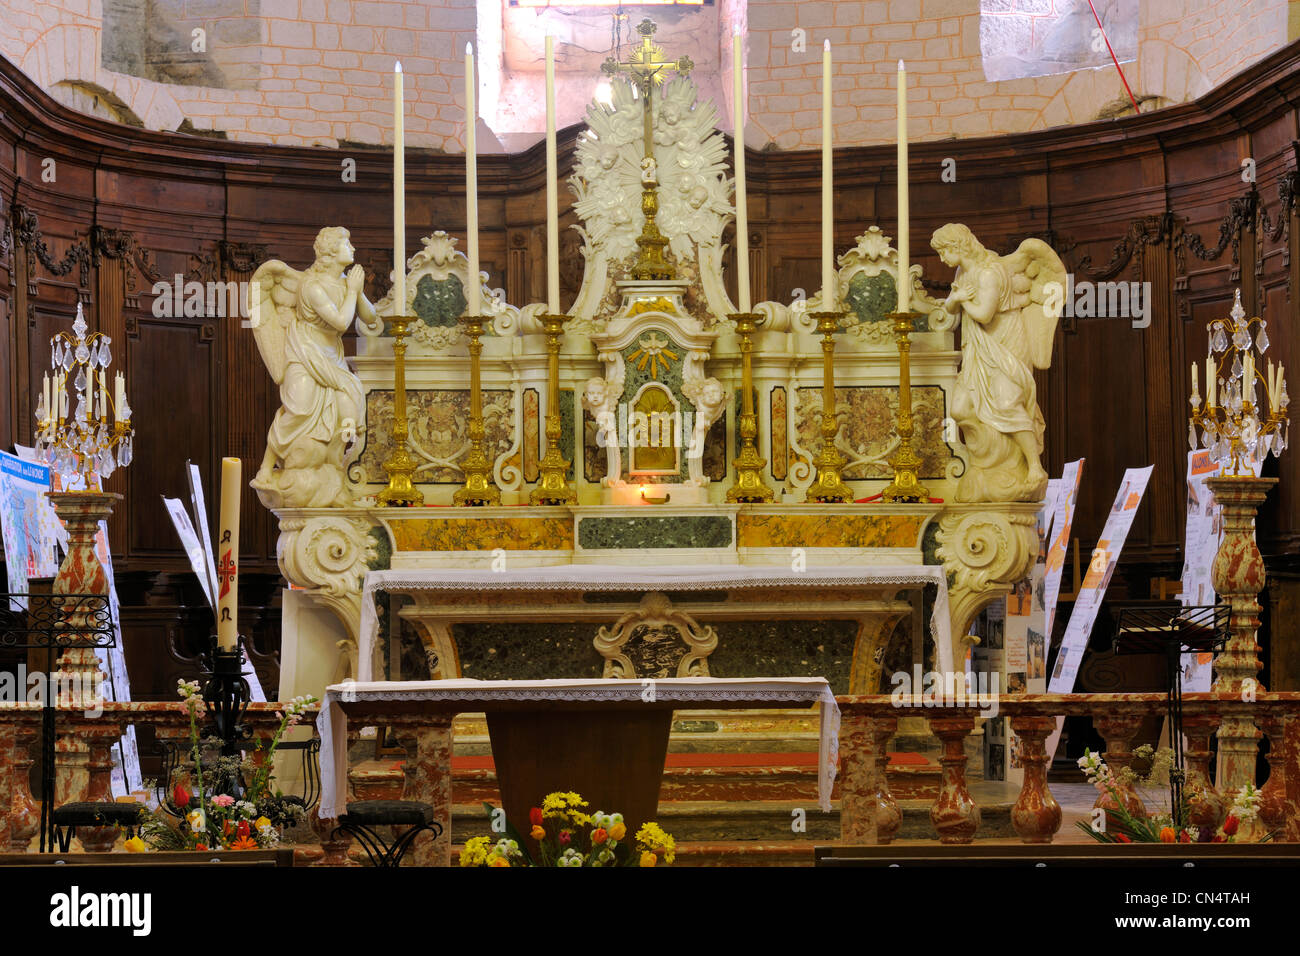 France, Aude, village of Caunes Minervois, Benedictine abbey founded in 780, baroque altar Stock Photo